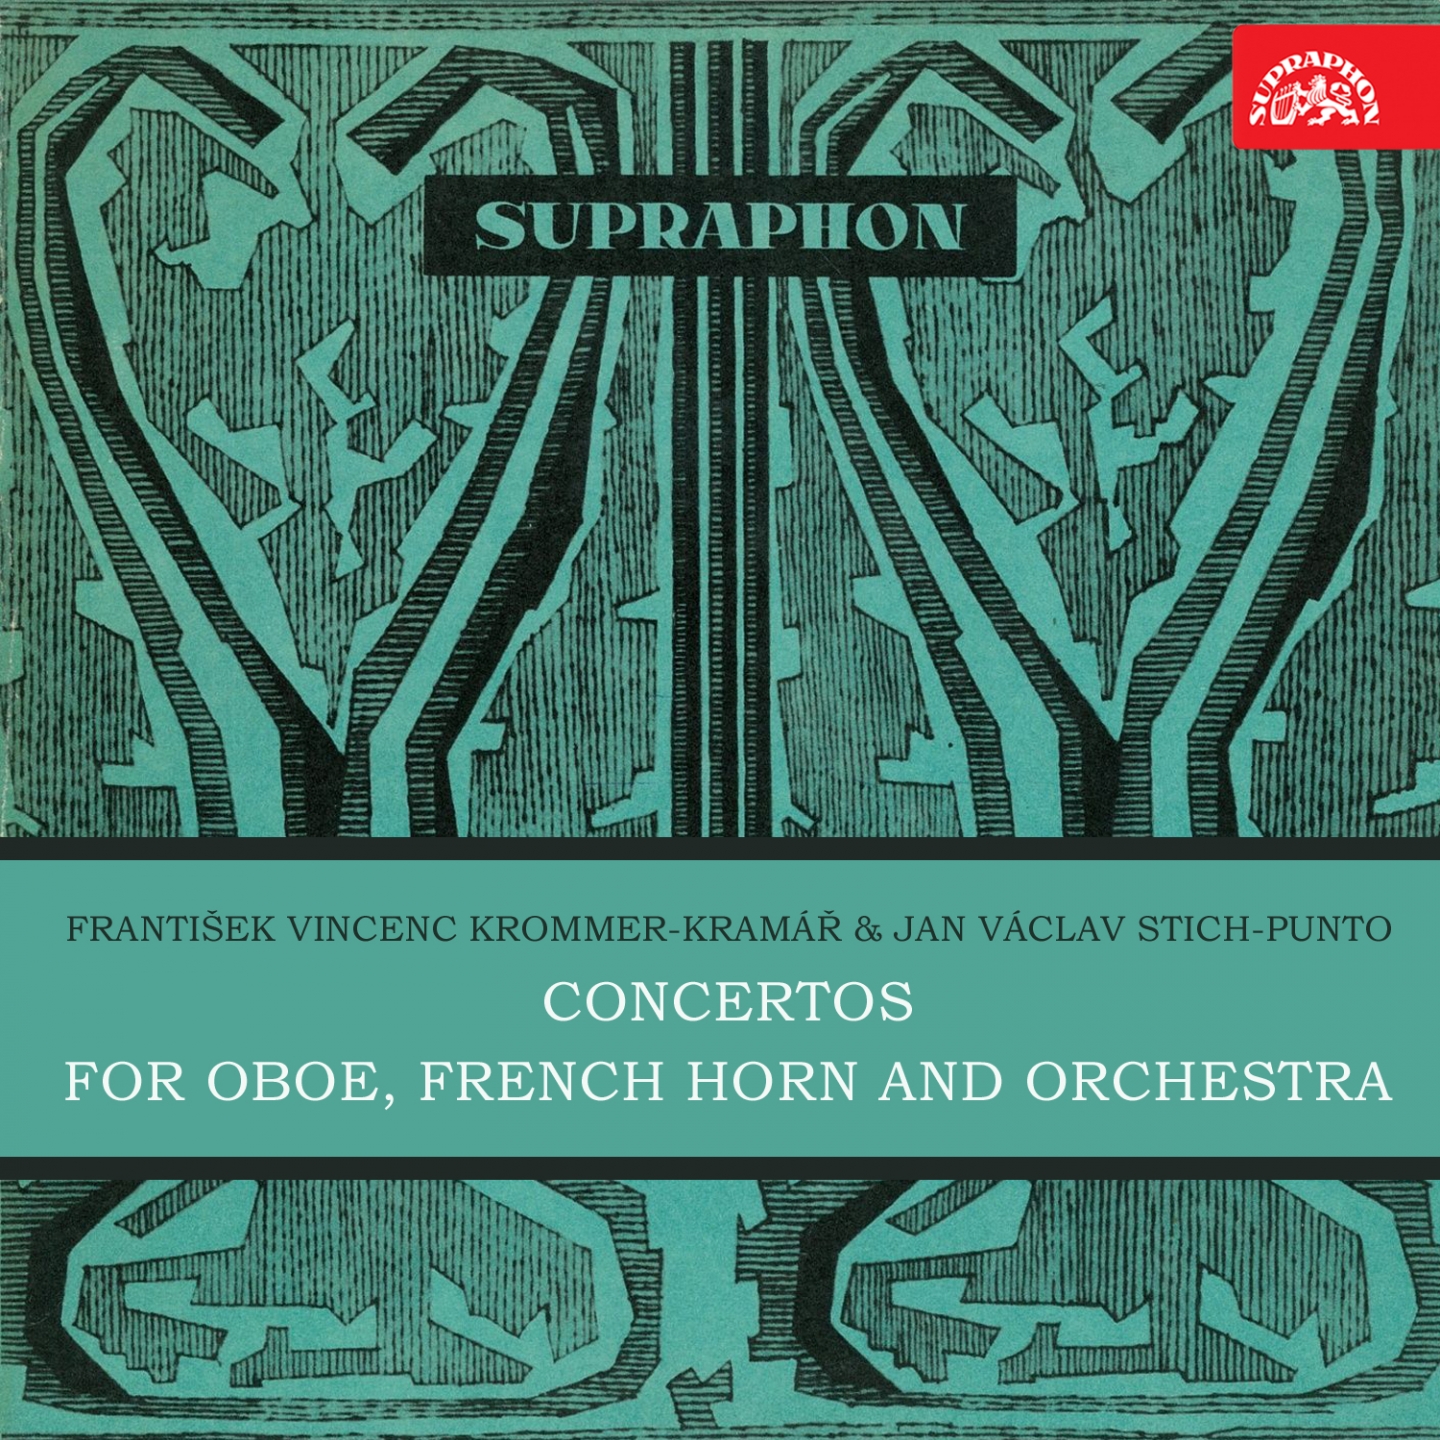 Concerto for French Horn and Orchestra No. 5 in F-Sharp Major, Op. 52, .: I. Allegro moderato